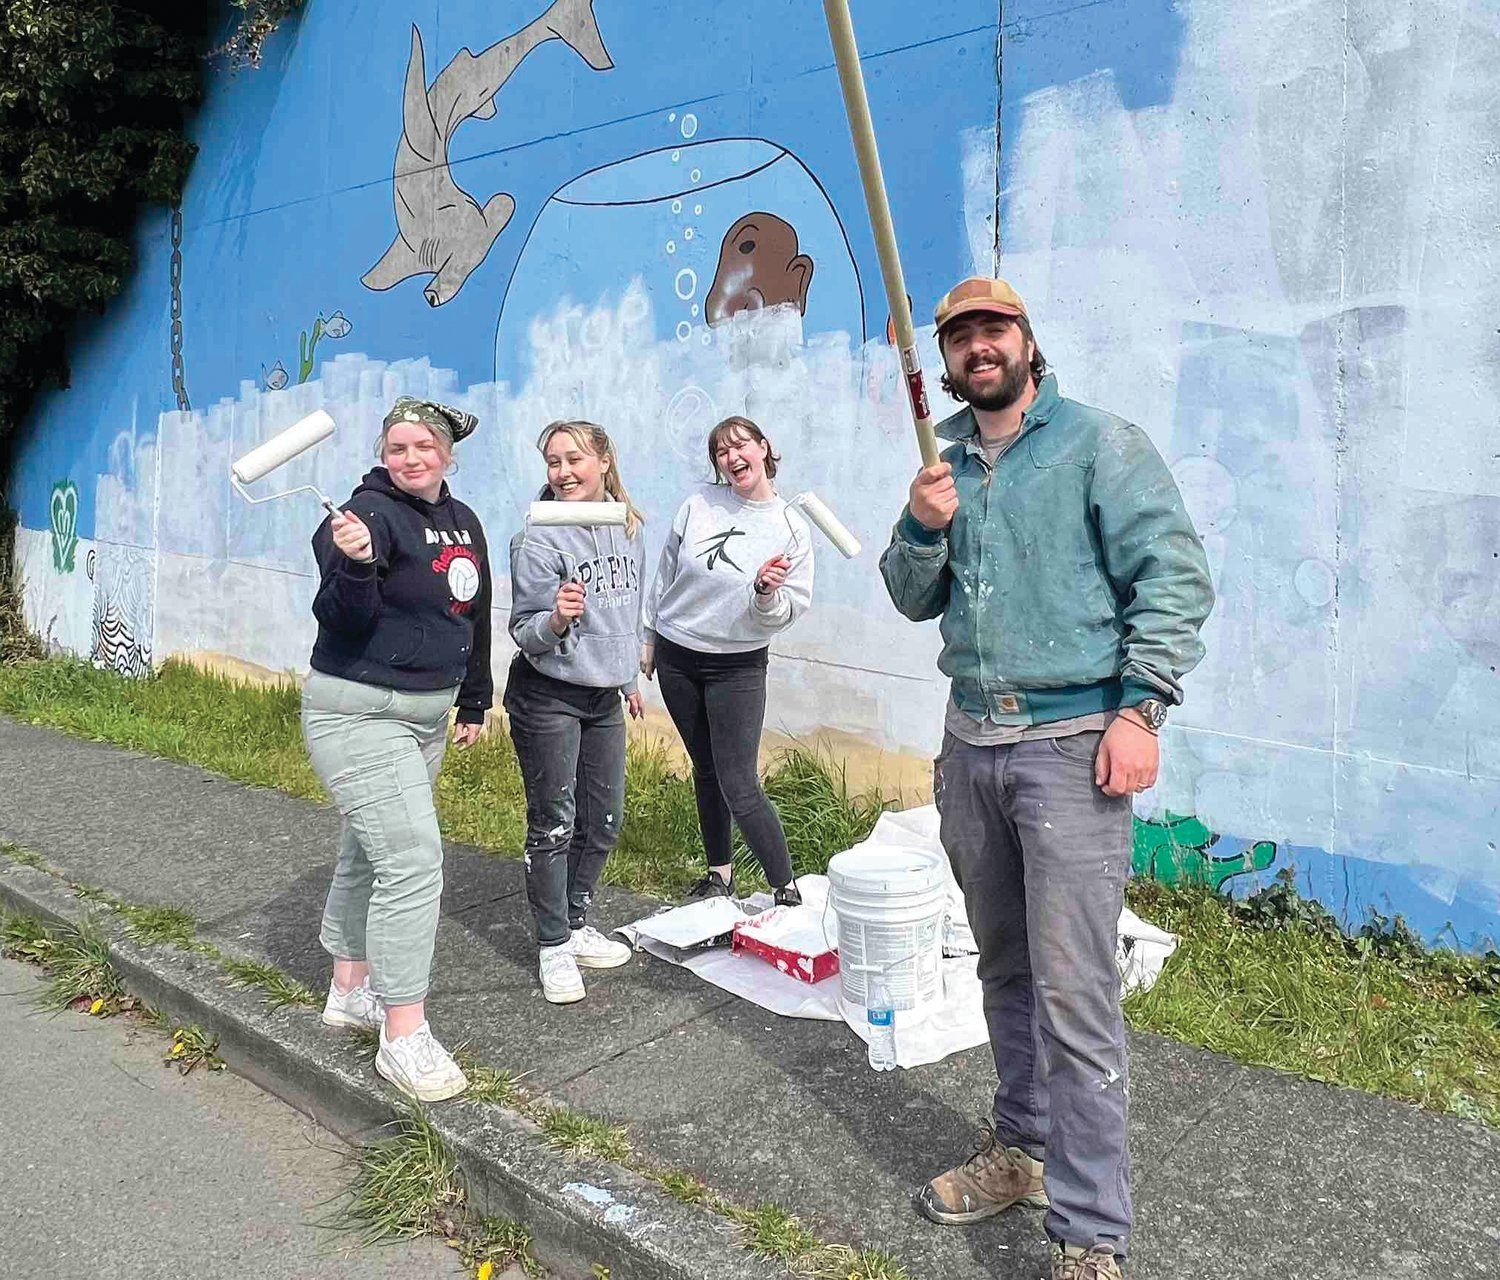 Charolette Falge, Emma Kane, Sidda Hayes, and Nick Mann pose while adding a new coat of paint to the 222-foot mural wall